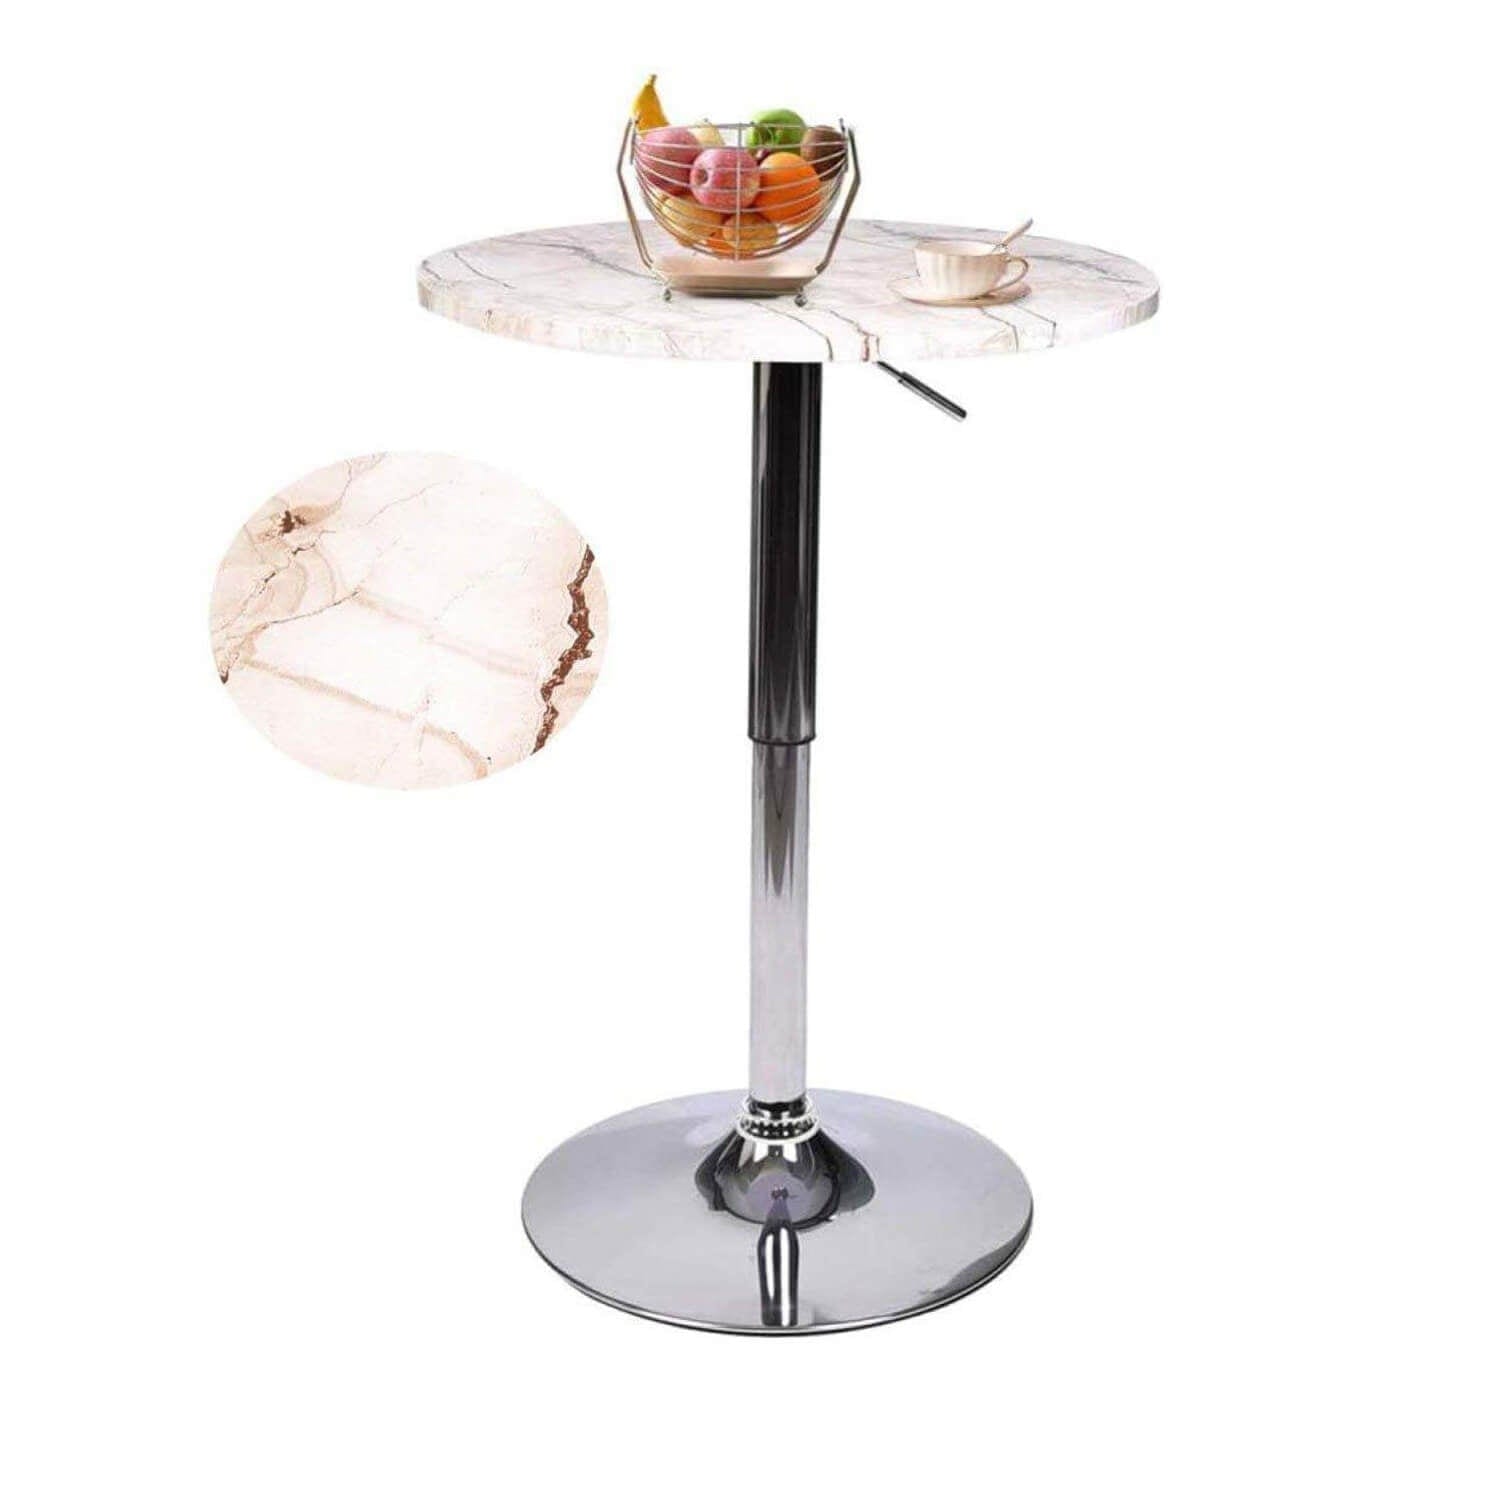 Elecwish Bar Table Marble White Bar Table OW003 is made of premium marble